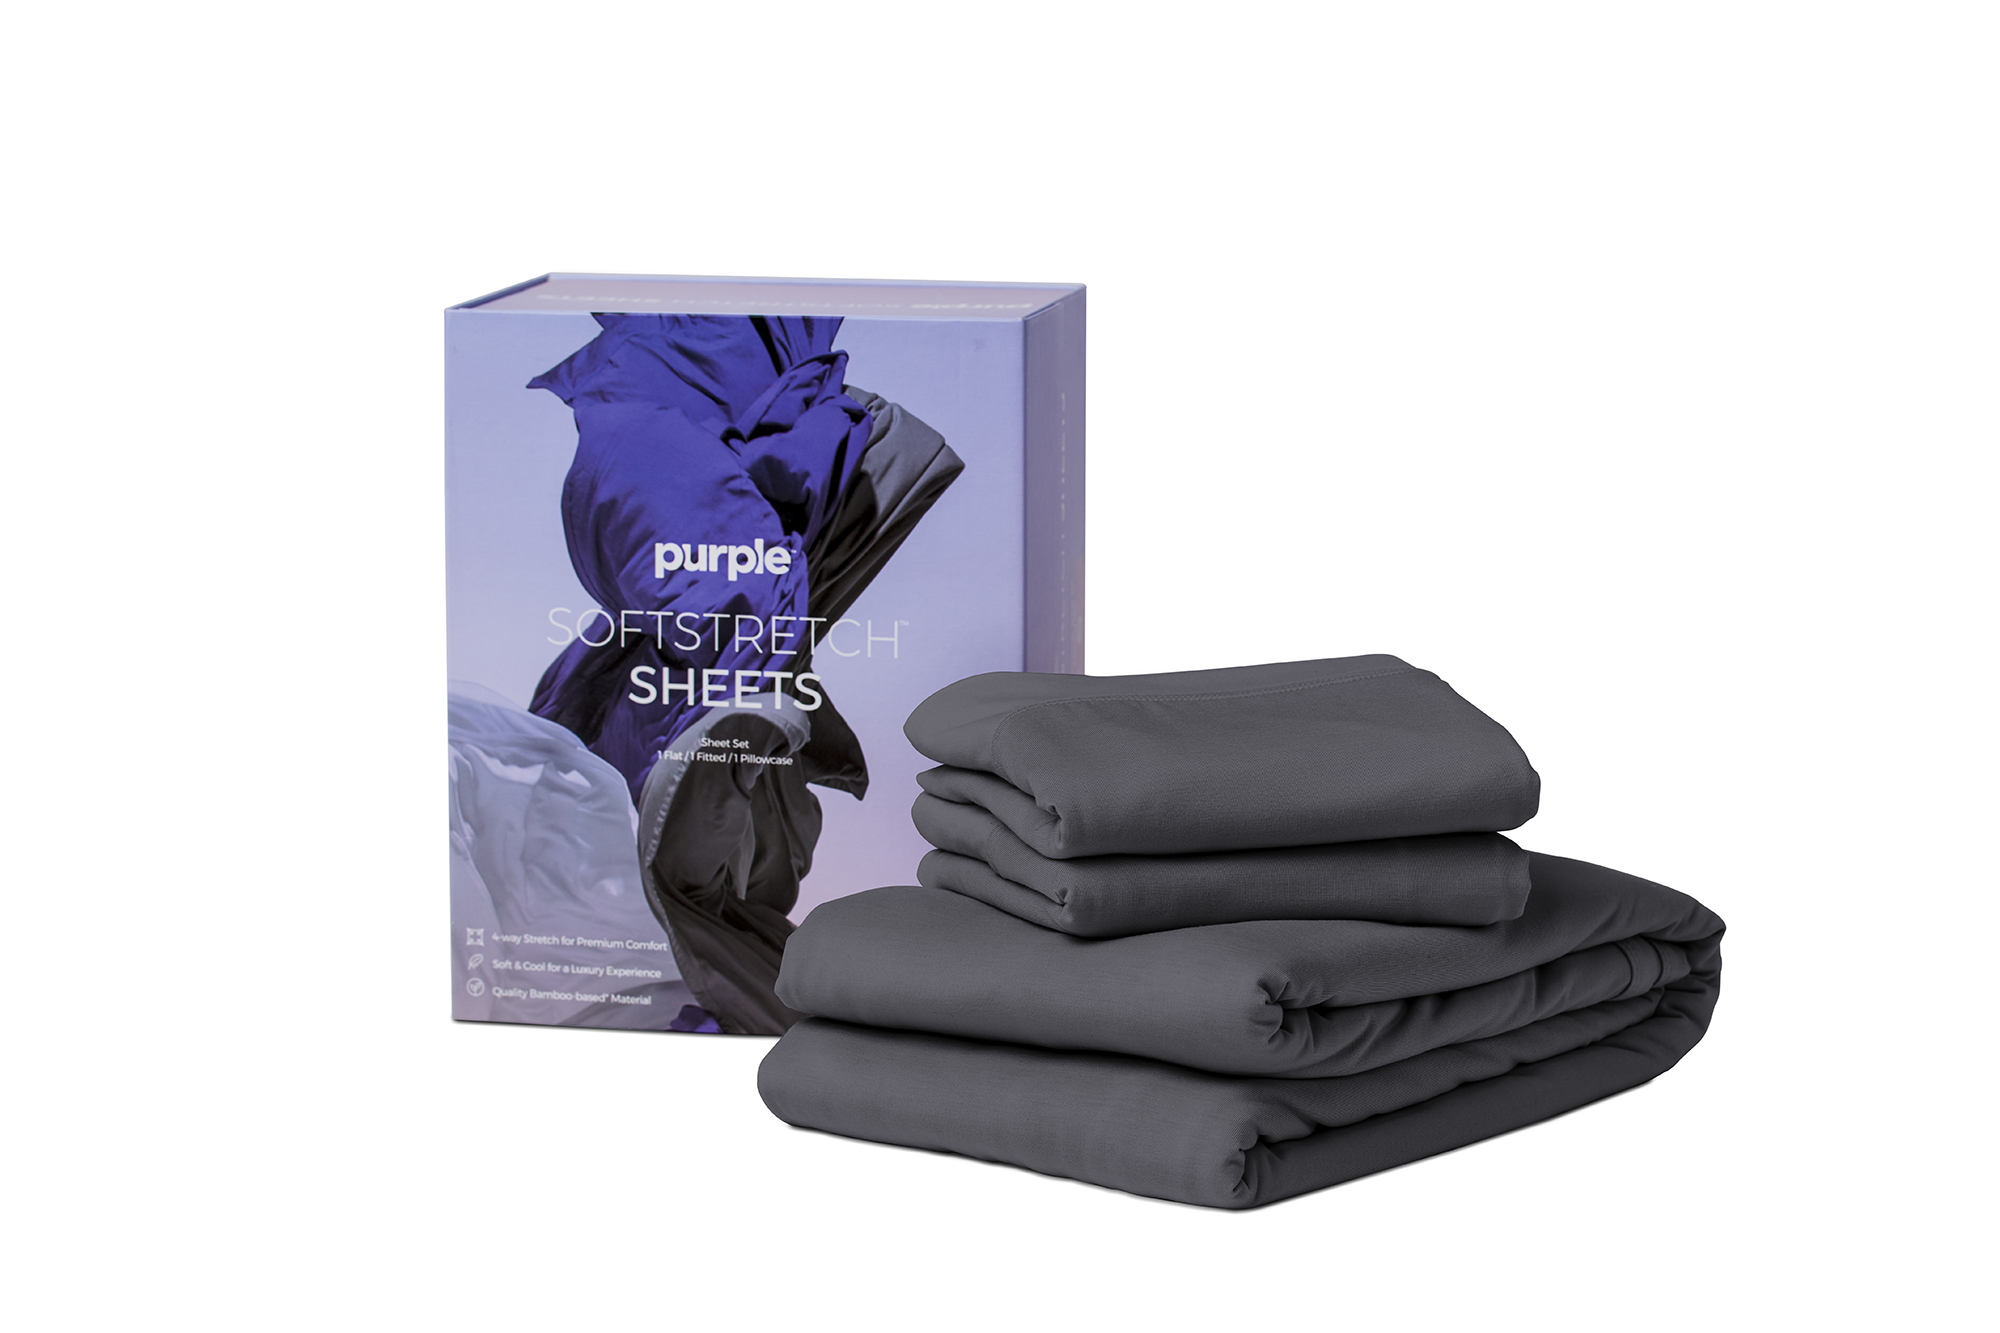 Purple SoftStretch Sheets Review - The Softest Sheets of the Year?? 